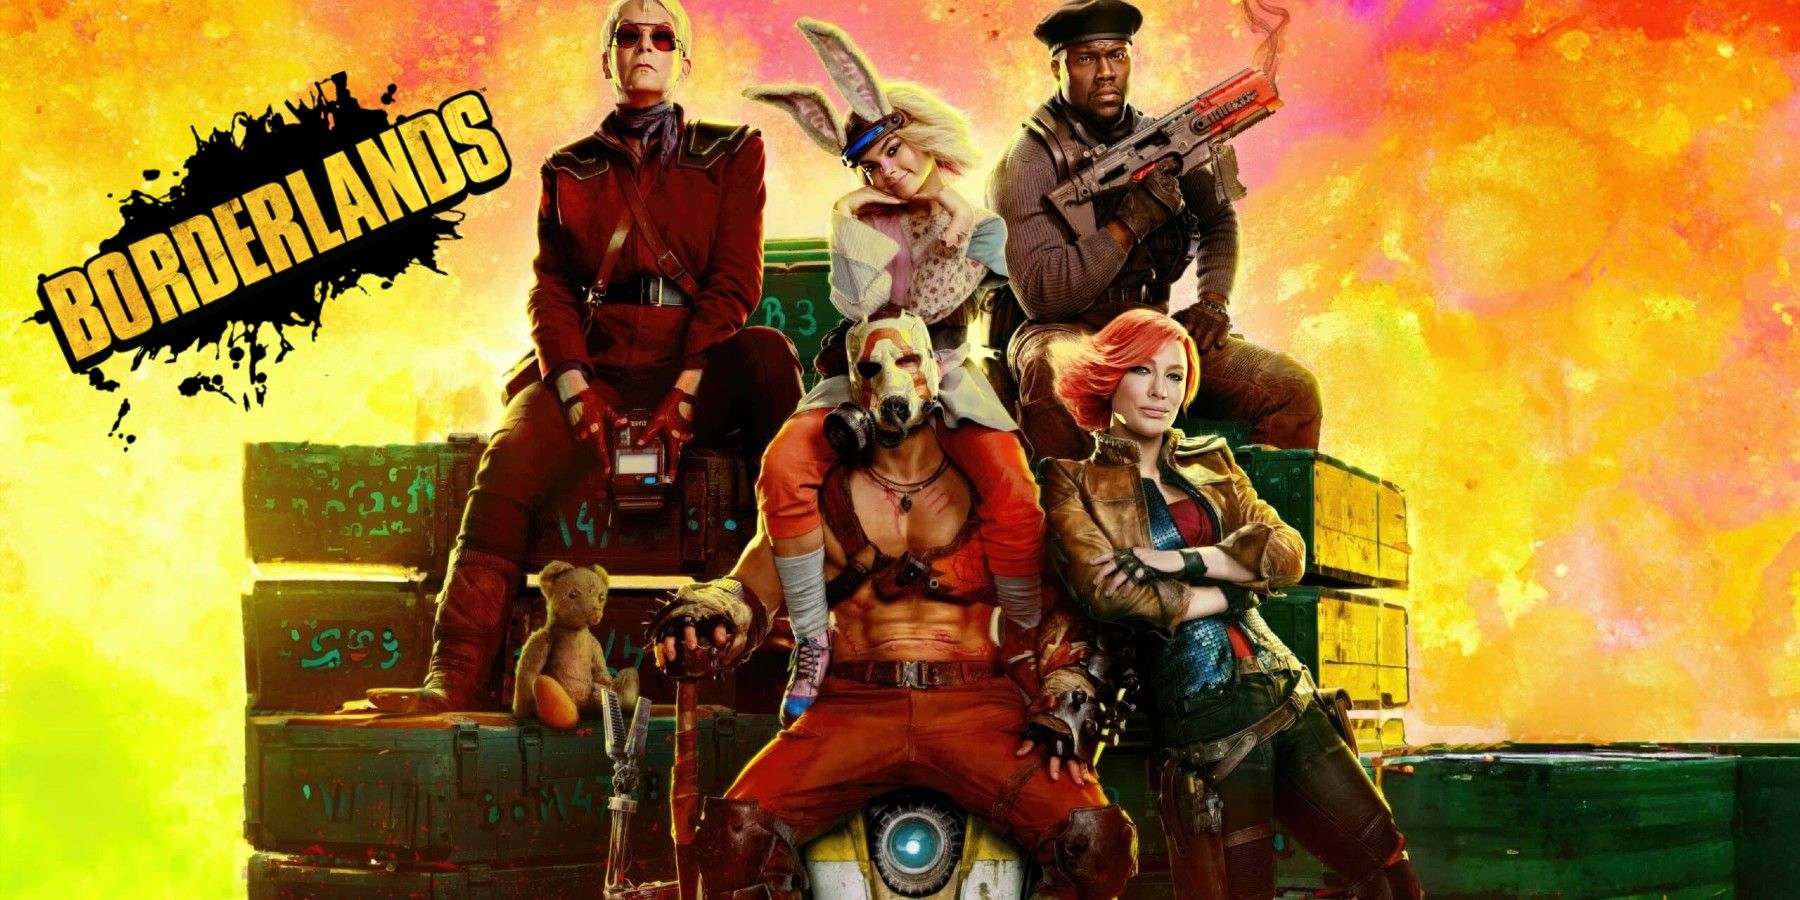 borderlands movie reveals exciting new poster